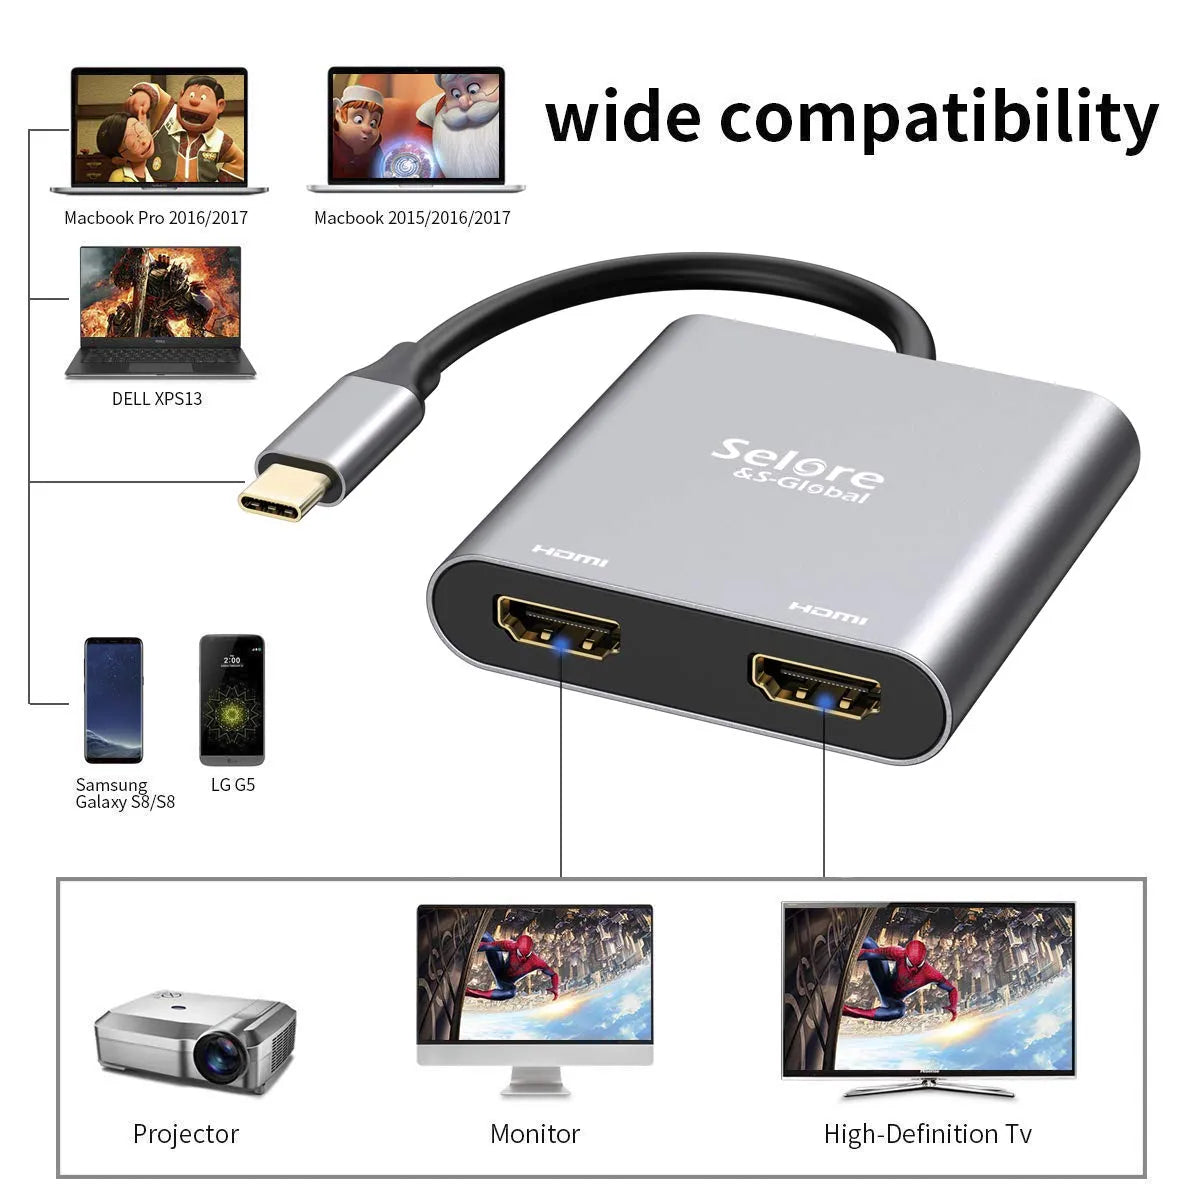 Selore USB-C to Dual HDMI Adapter 2 in 1